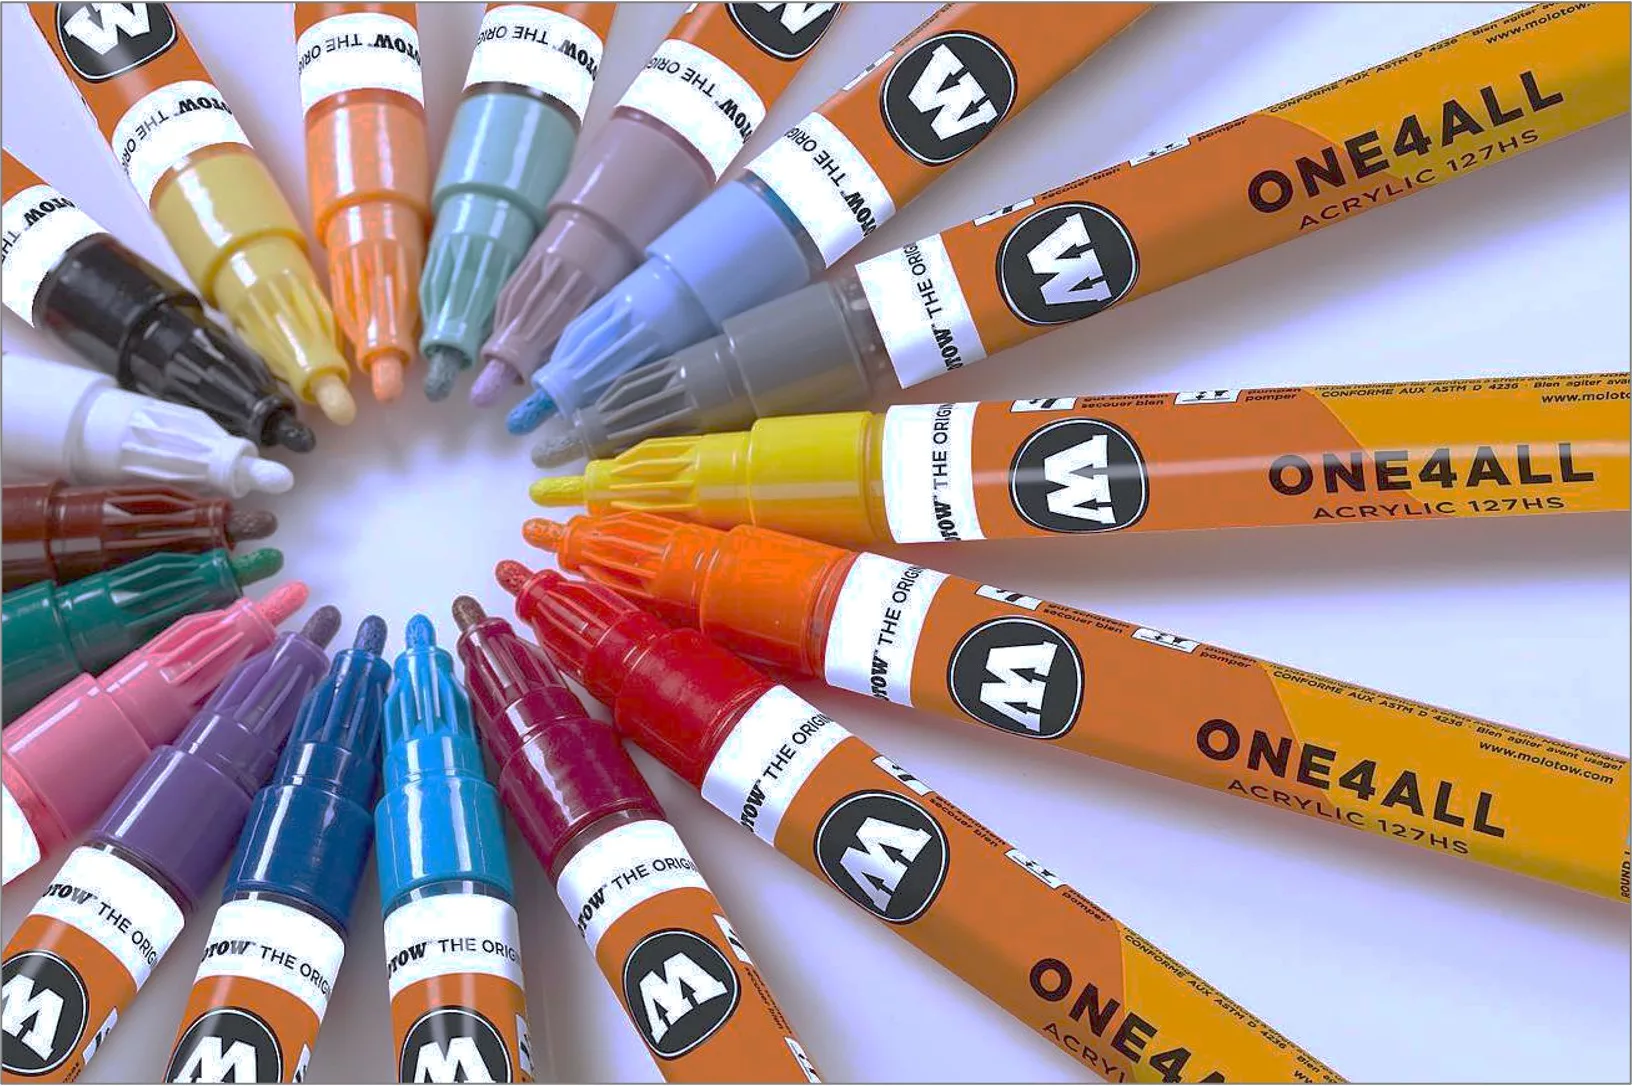 LOVE these paint pens, they're more vibrant than other similar brands , grabie  acrylic markers